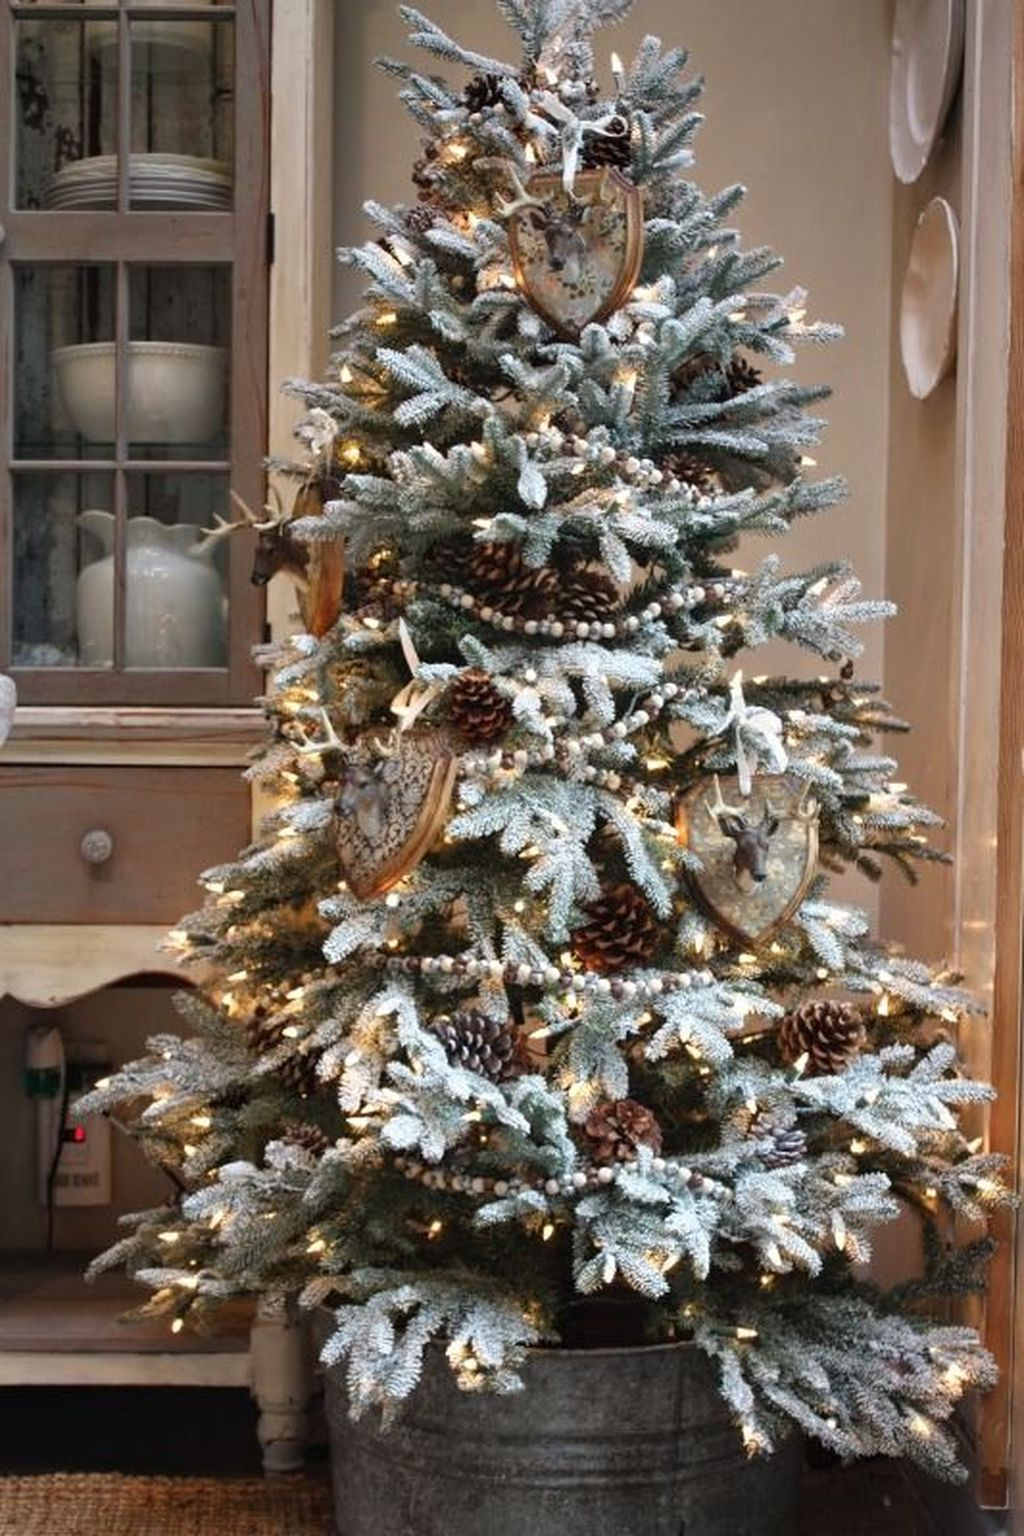 Inspiring Rustic Christmas Tree Decoration Ideas For Cheerful Day 36